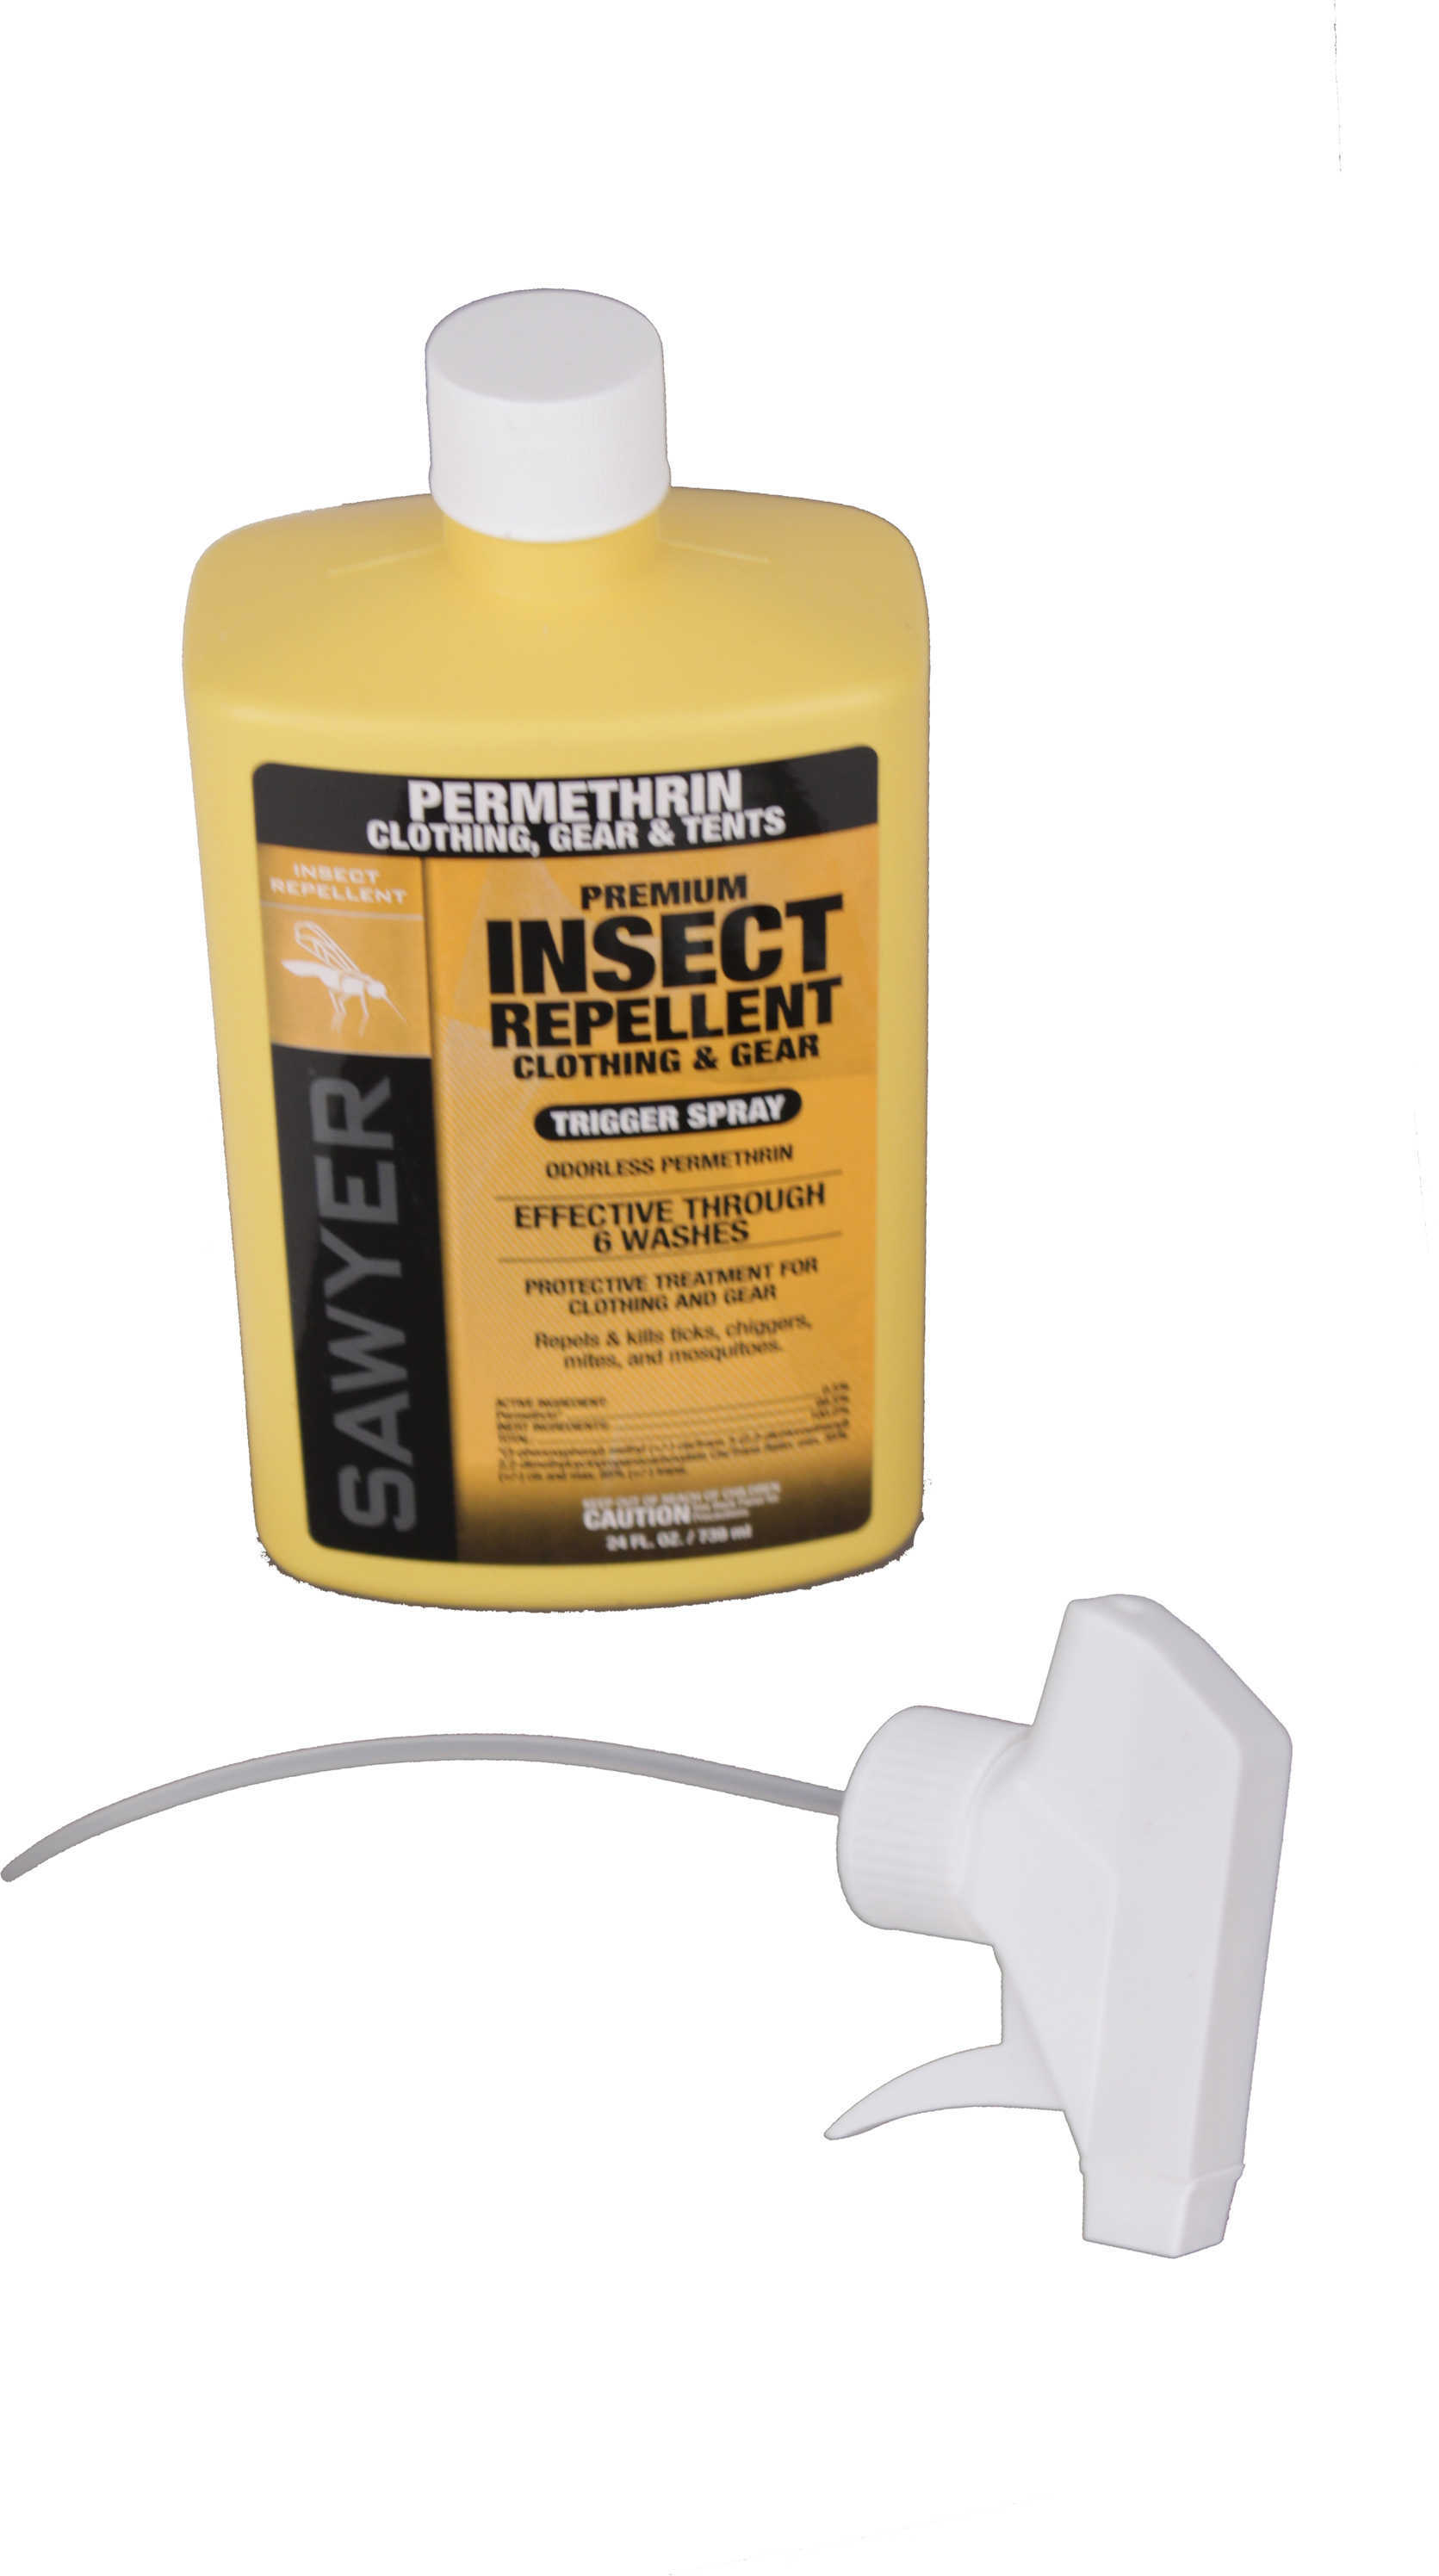 Sawyer Insect Repellent Gear/Clothing Permethrin 24oz. Model: SP657